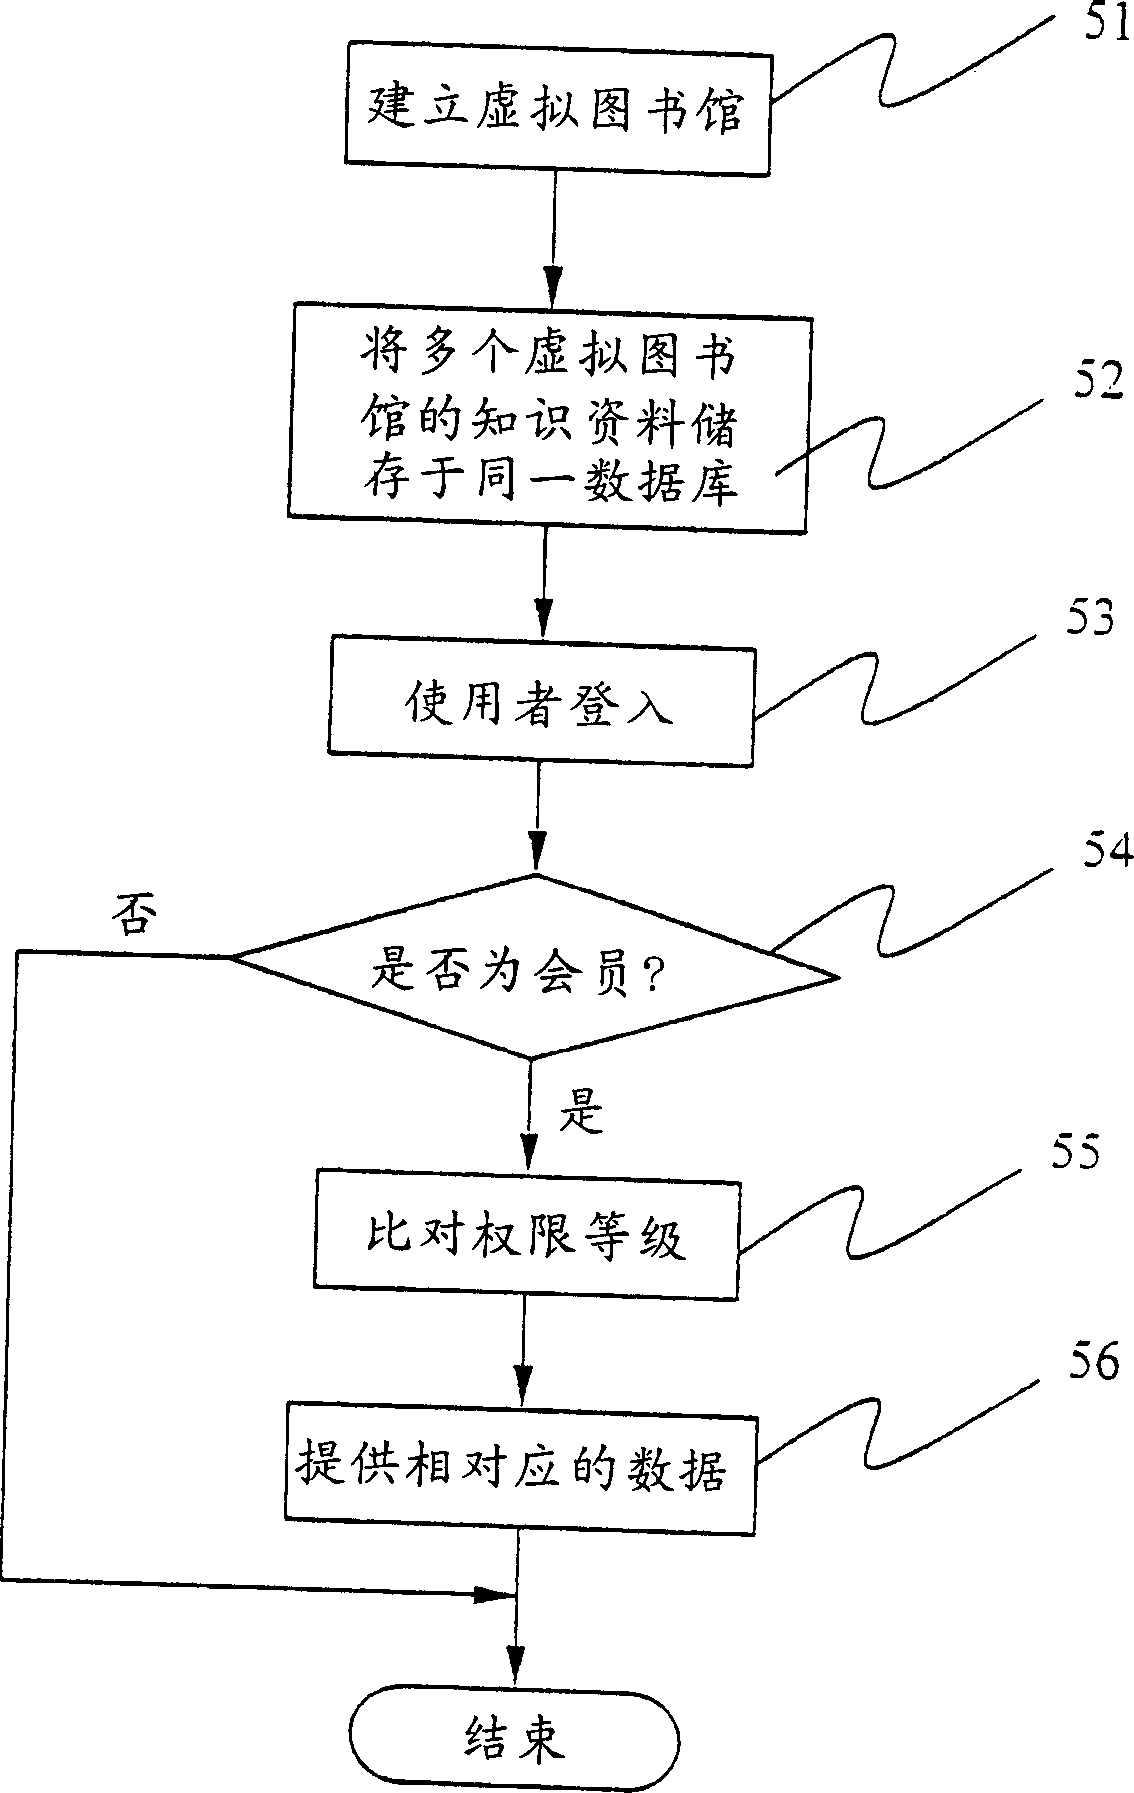 Virtual library management system capable of storing data into specific zone and its method